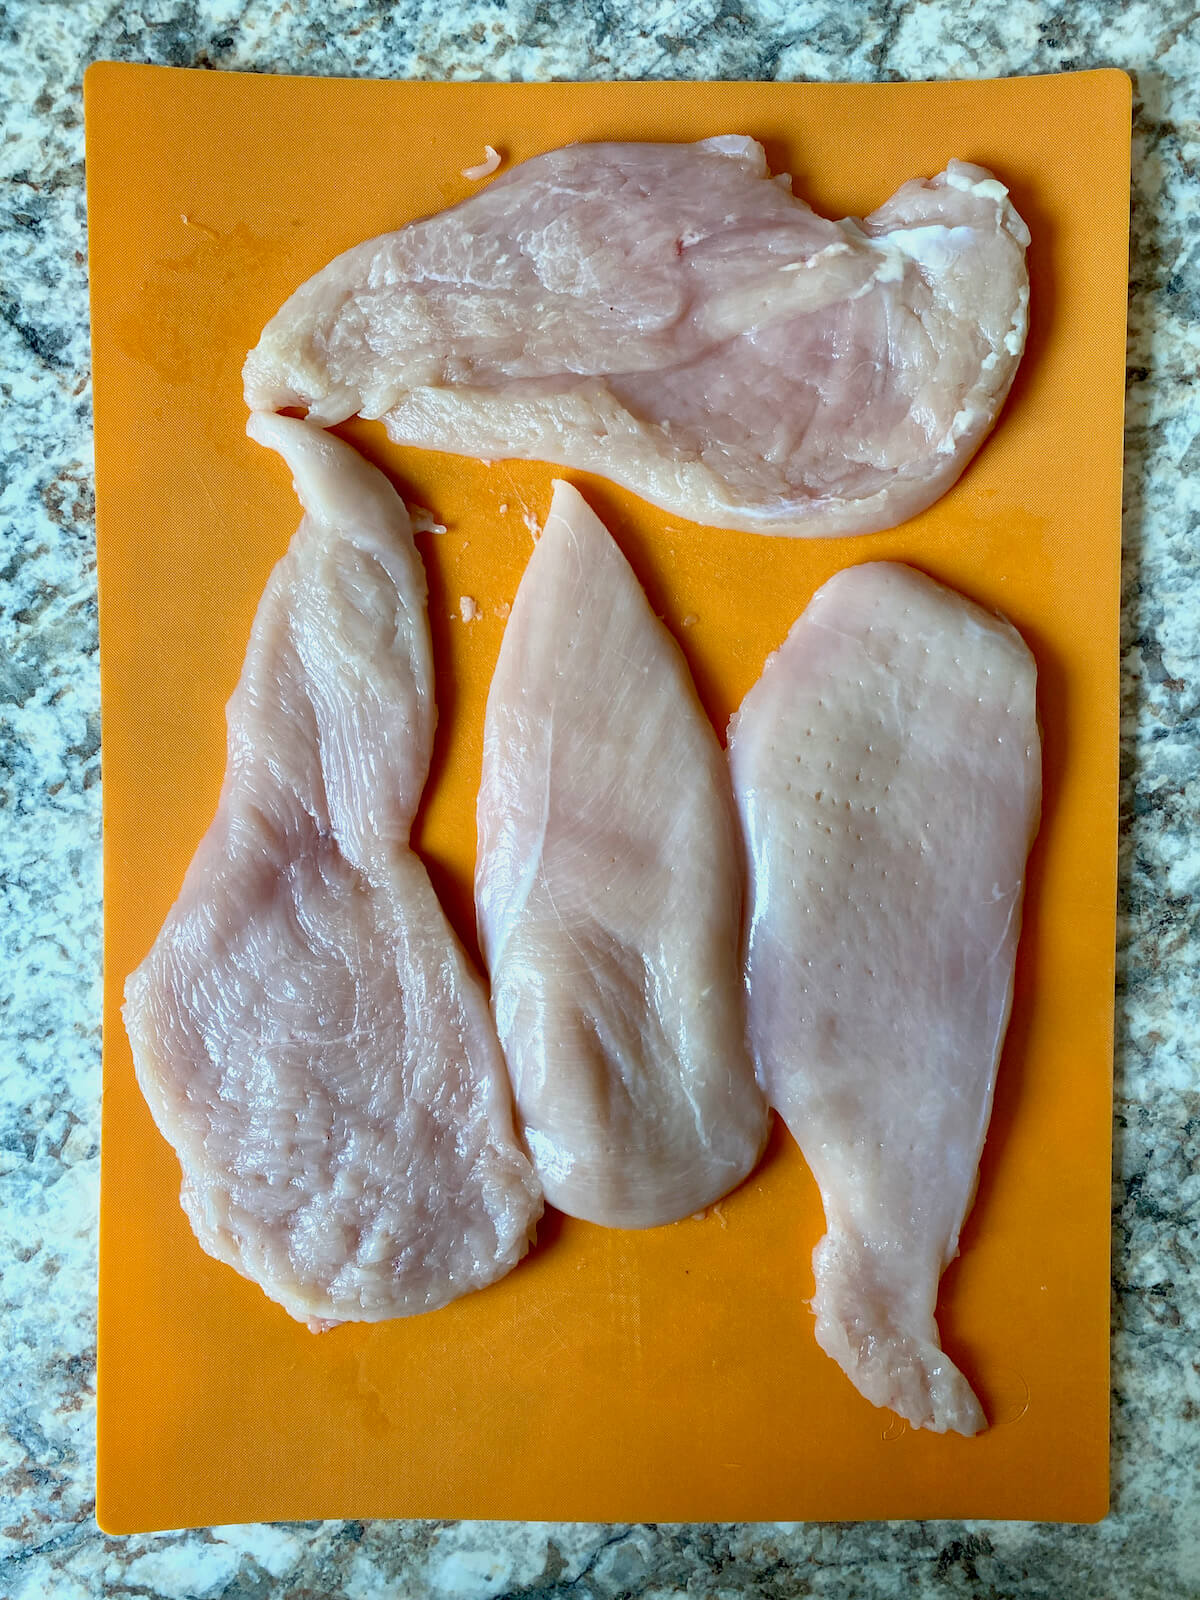 Four chicken breasts pounded out on an orange cutting board.